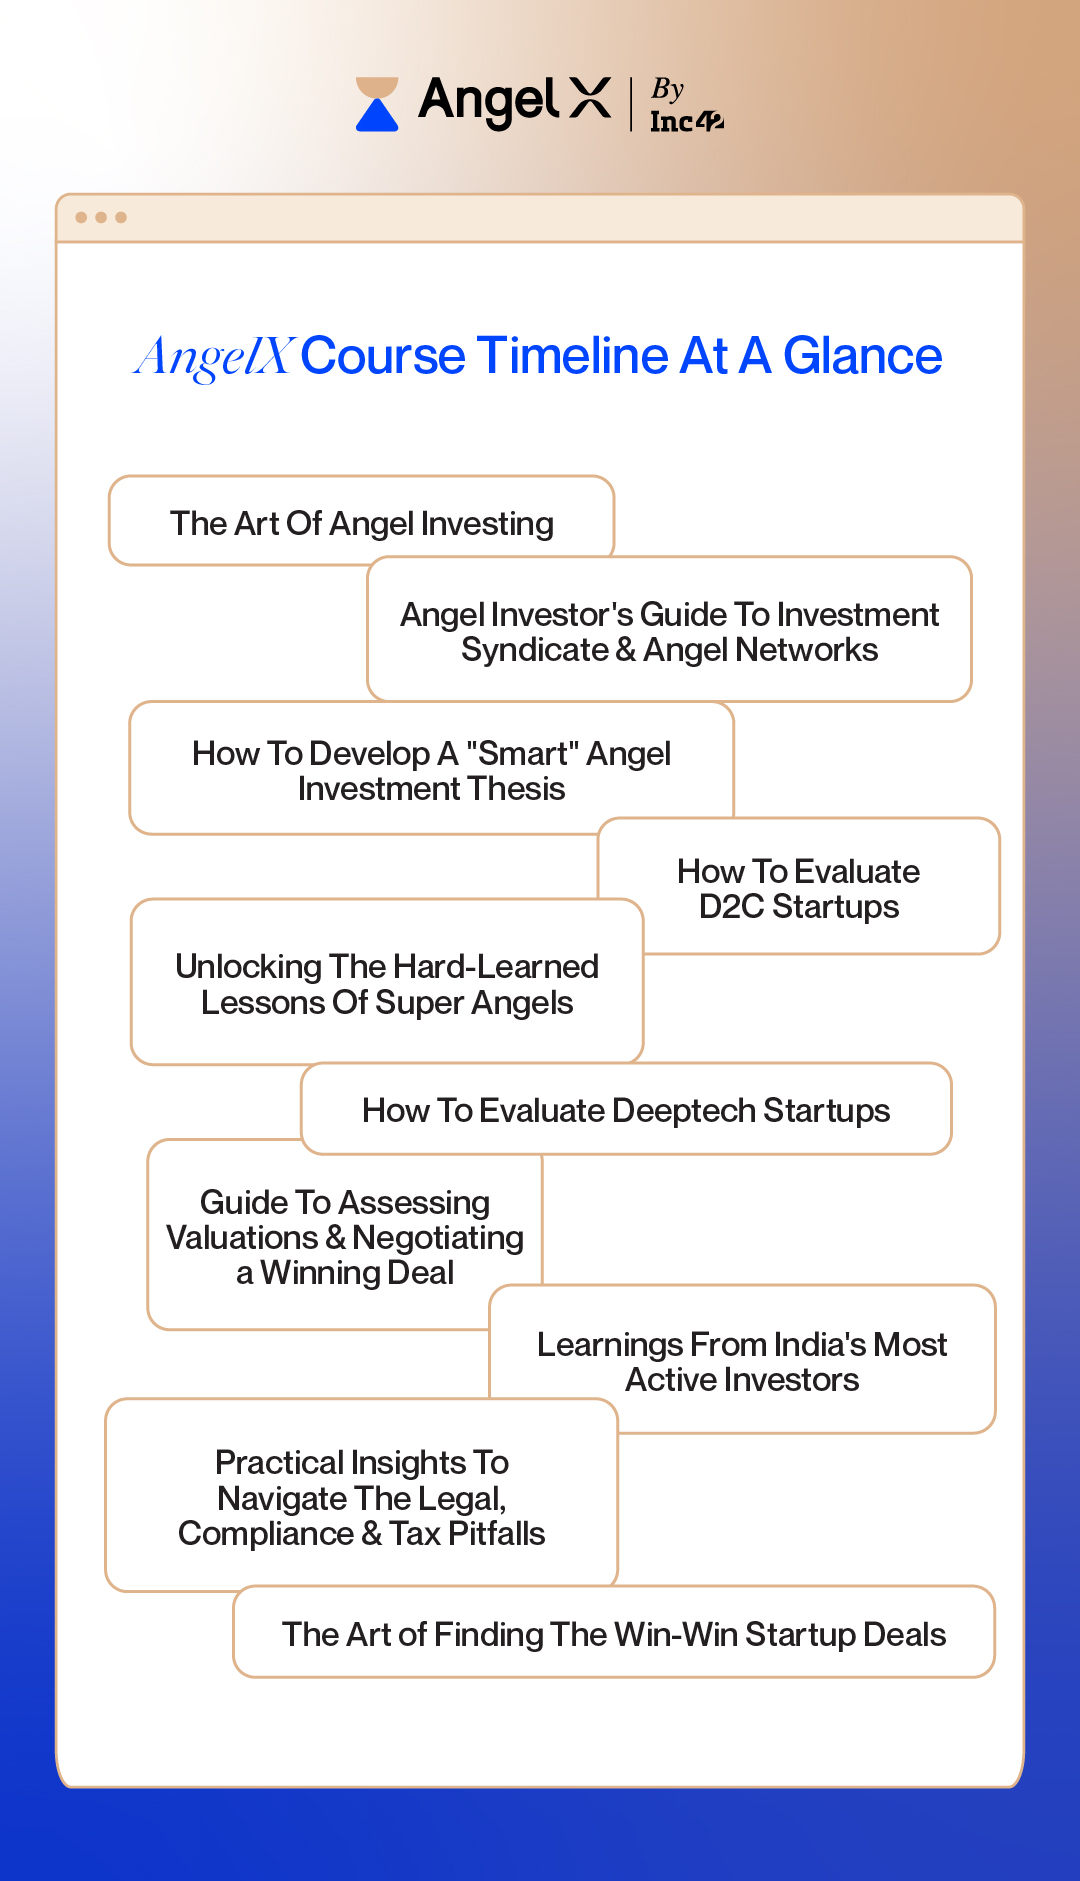 AngelX course timeline at a glance